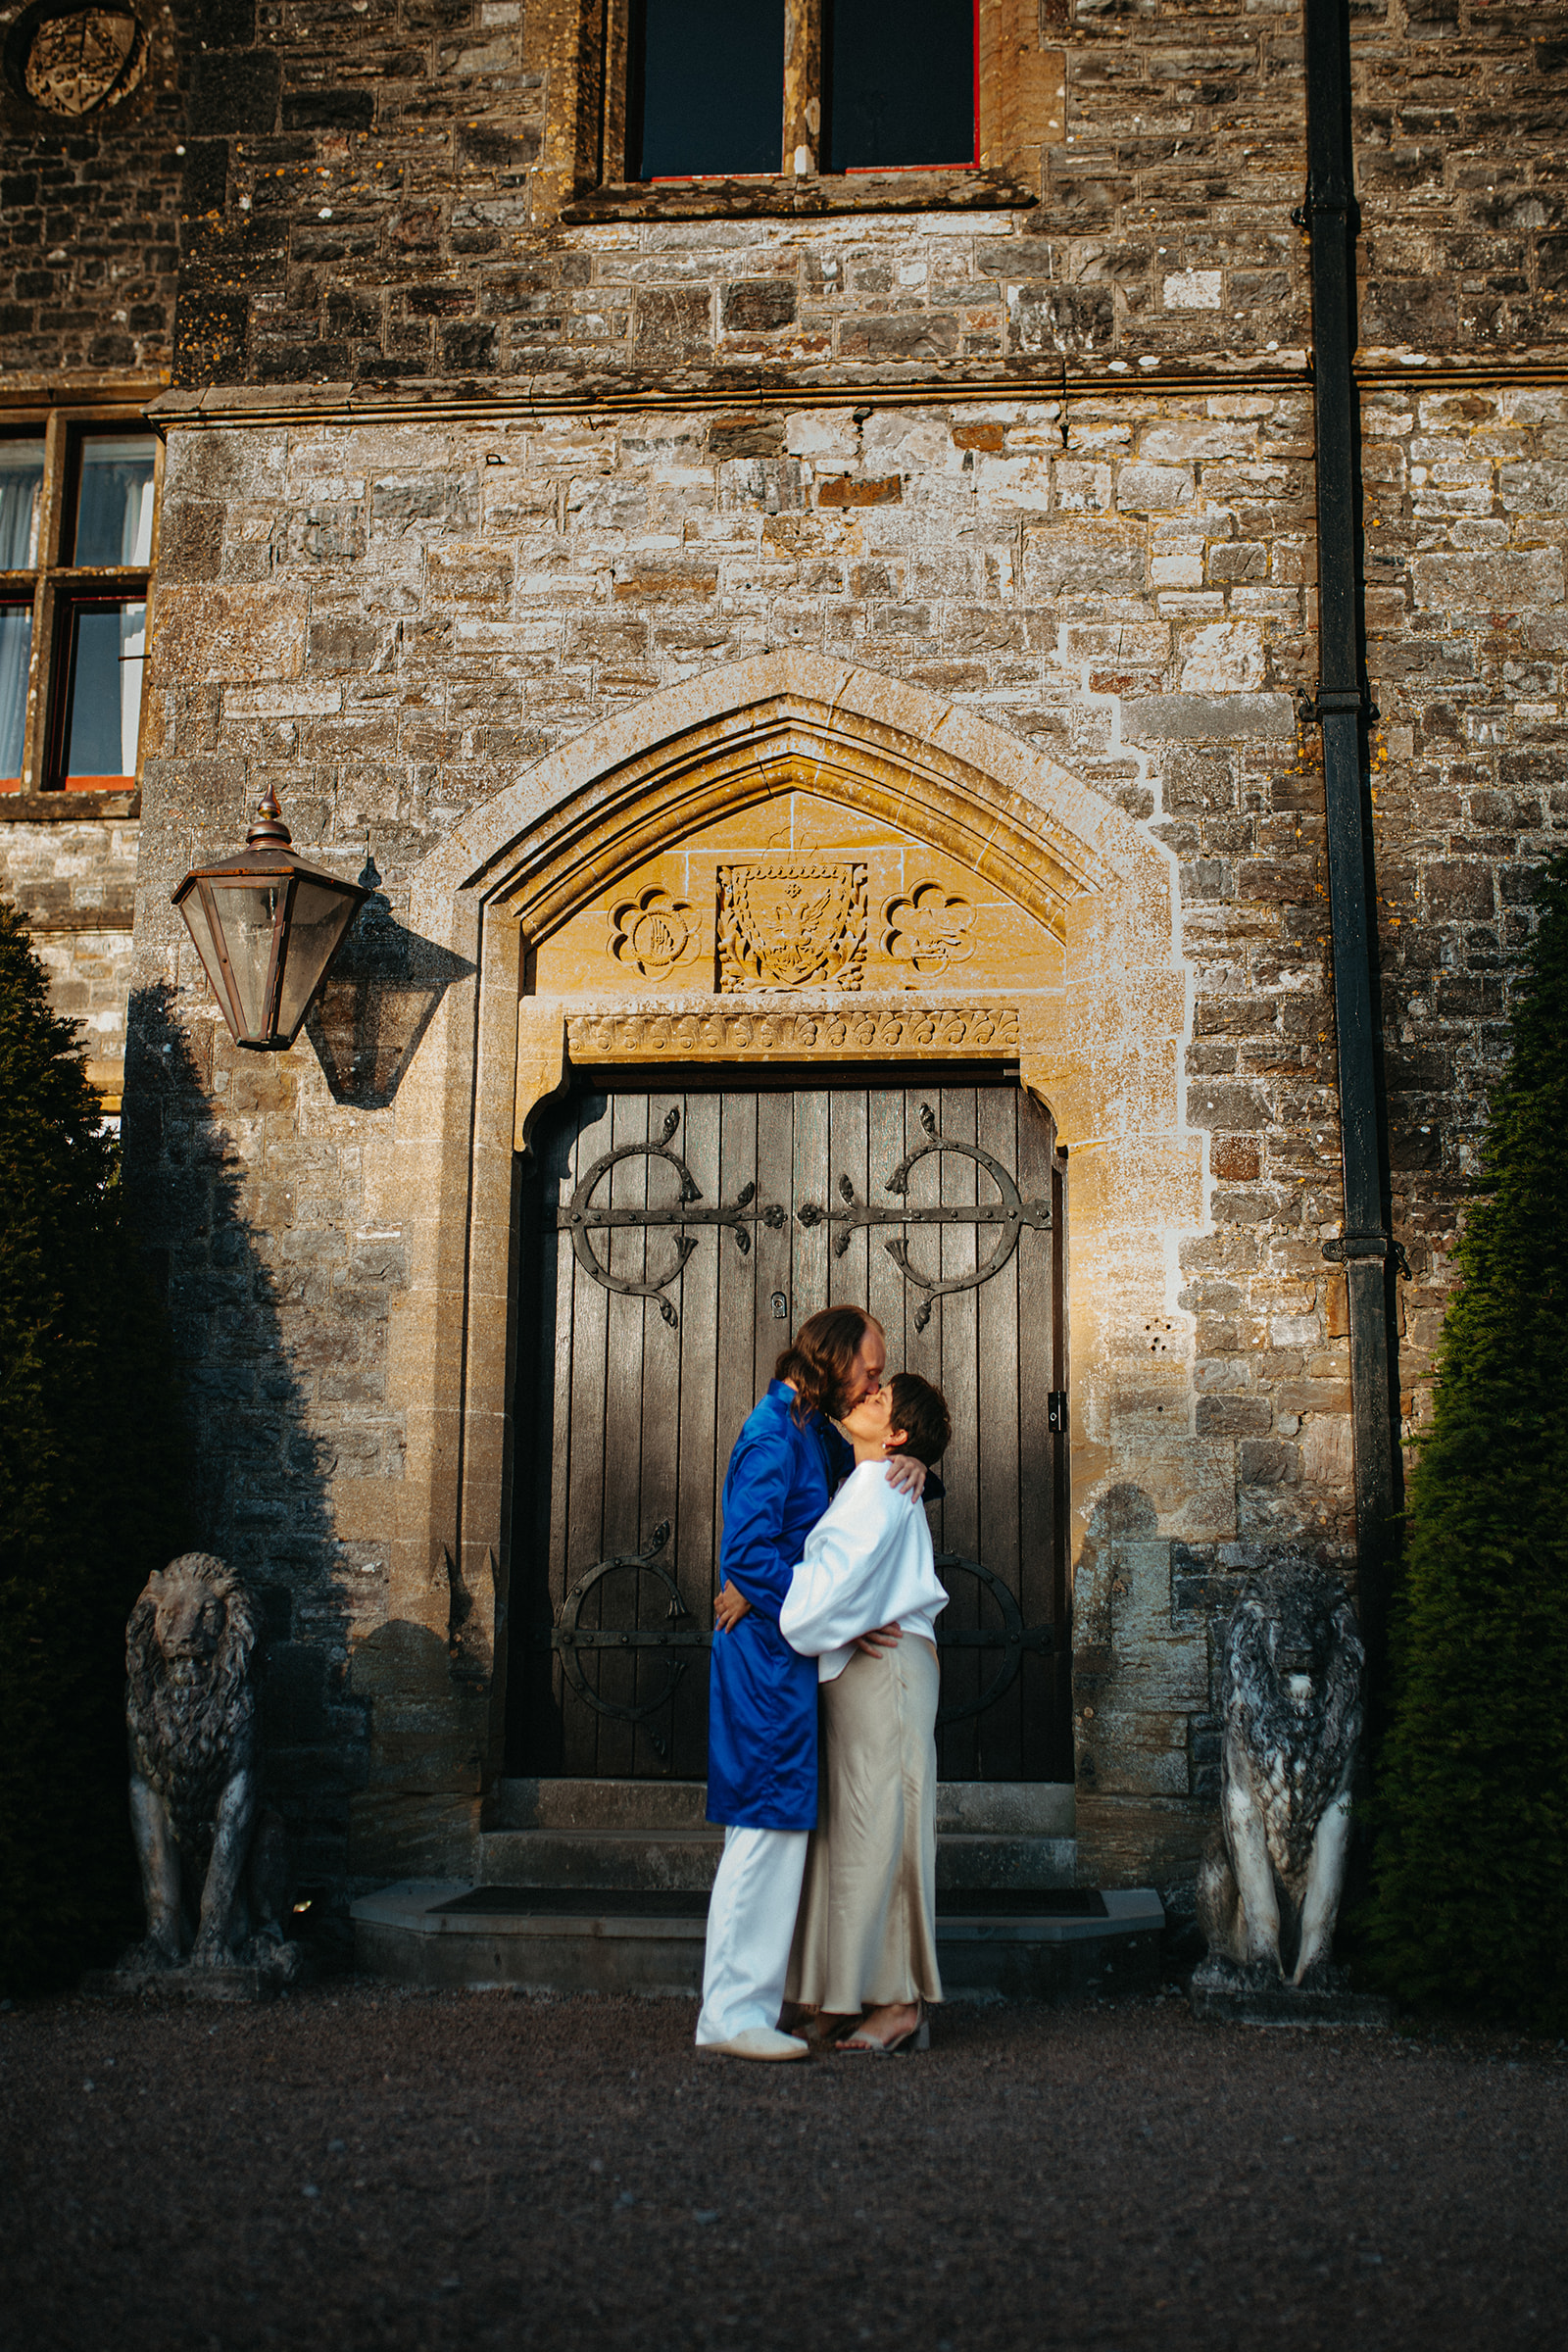 Romantic kiss of a couple in front of the majestic Huntsham Court castle, England.